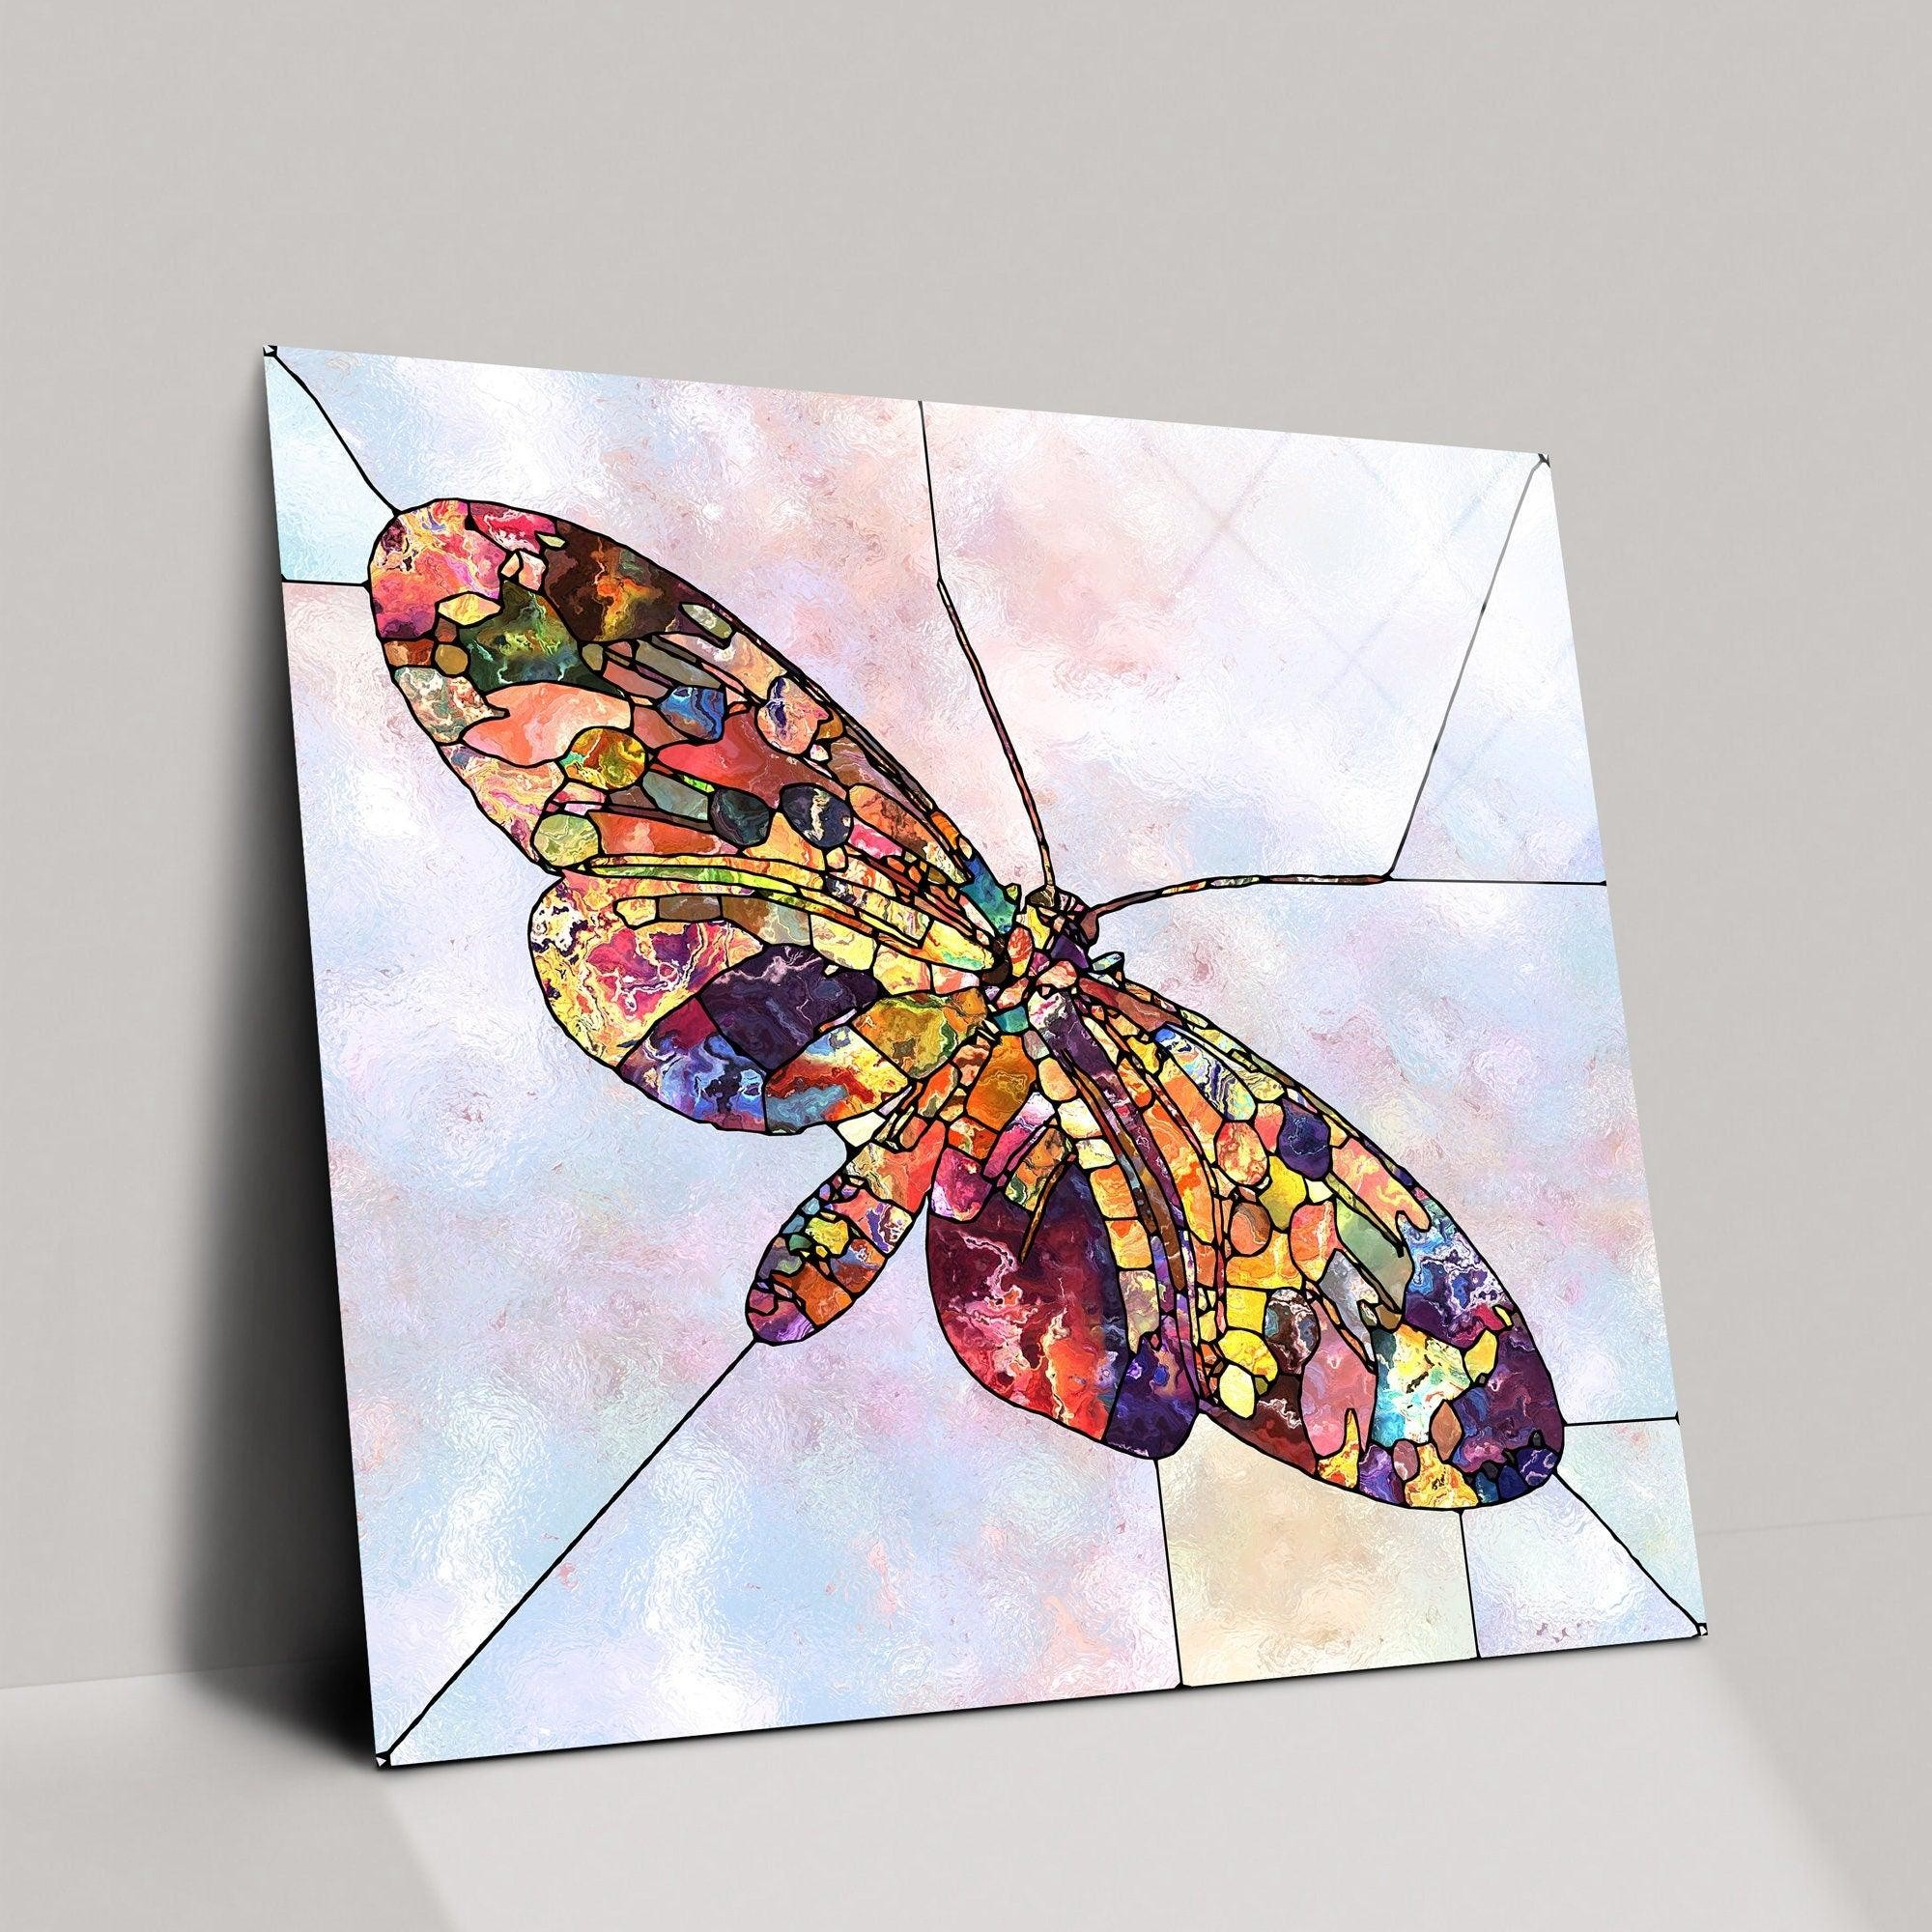 Butterfly Canvas Wall Art| animal  Canvas Painting, Large Canvas Art, glass animals, Animal Canvas Art, animal artwork, butterflies canvas